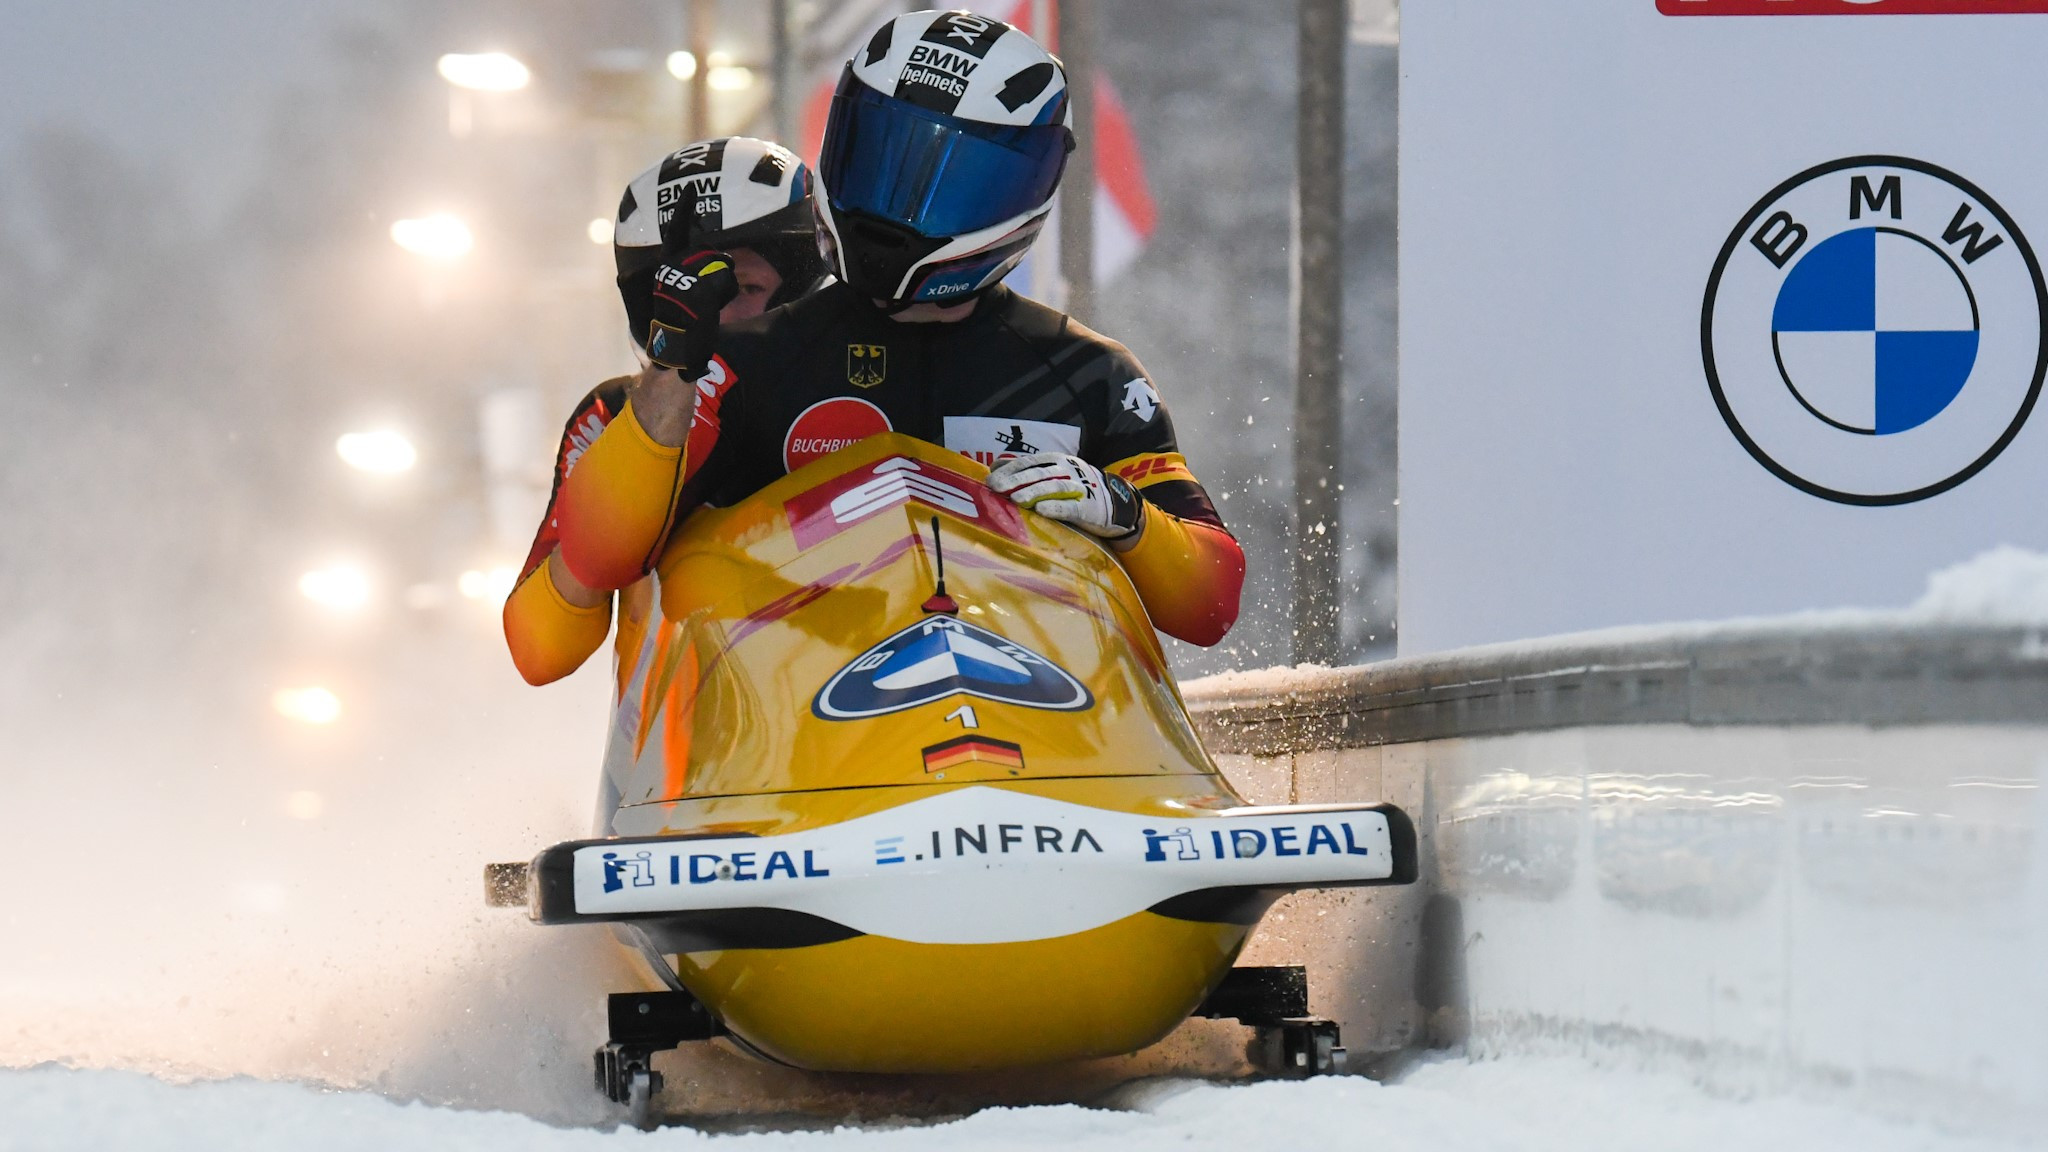 Friedrich breaks 55-year record with two-man bobsleigh gold at IBSF World Championships